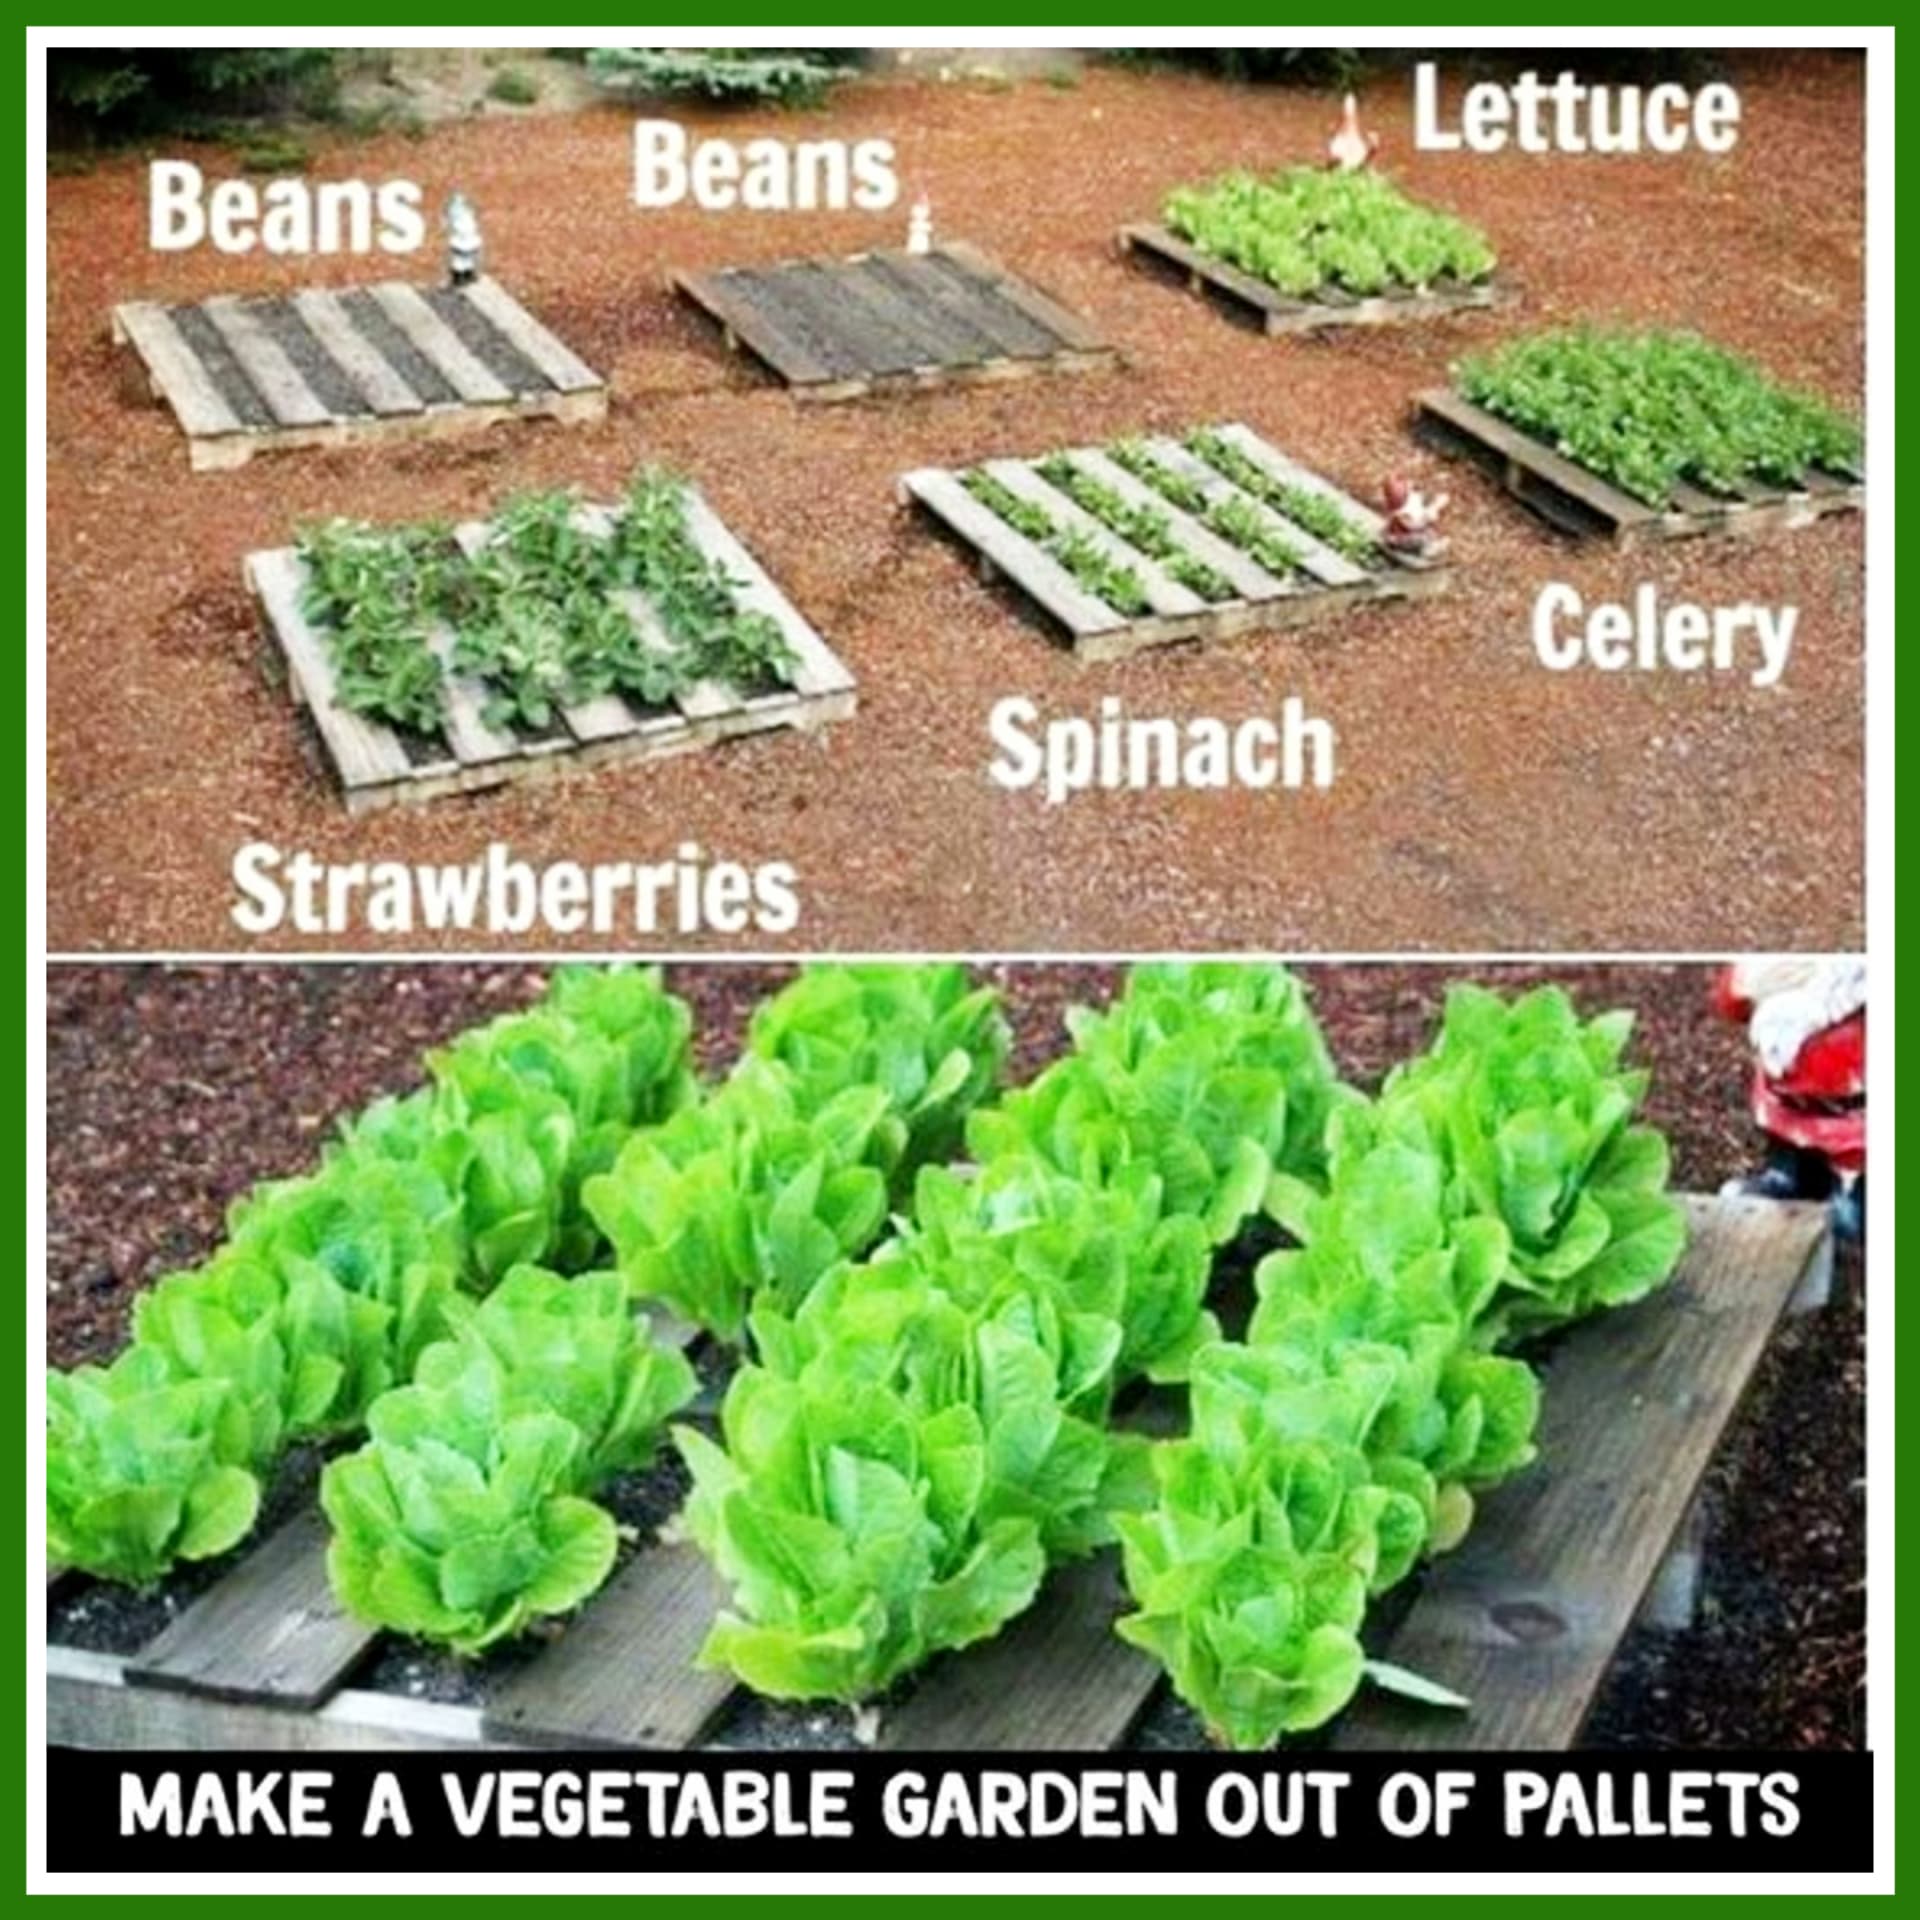 Pallet vegetable garden - DIY raised pallet vegetable garden to grow veggies, herbs, strawberry plants and more - easy DIY pallet projects ideas for your garden, backyard, patio, decks or in your house.  How to build a pallet vegetable garden ( you'll see how easy it is how to make it)